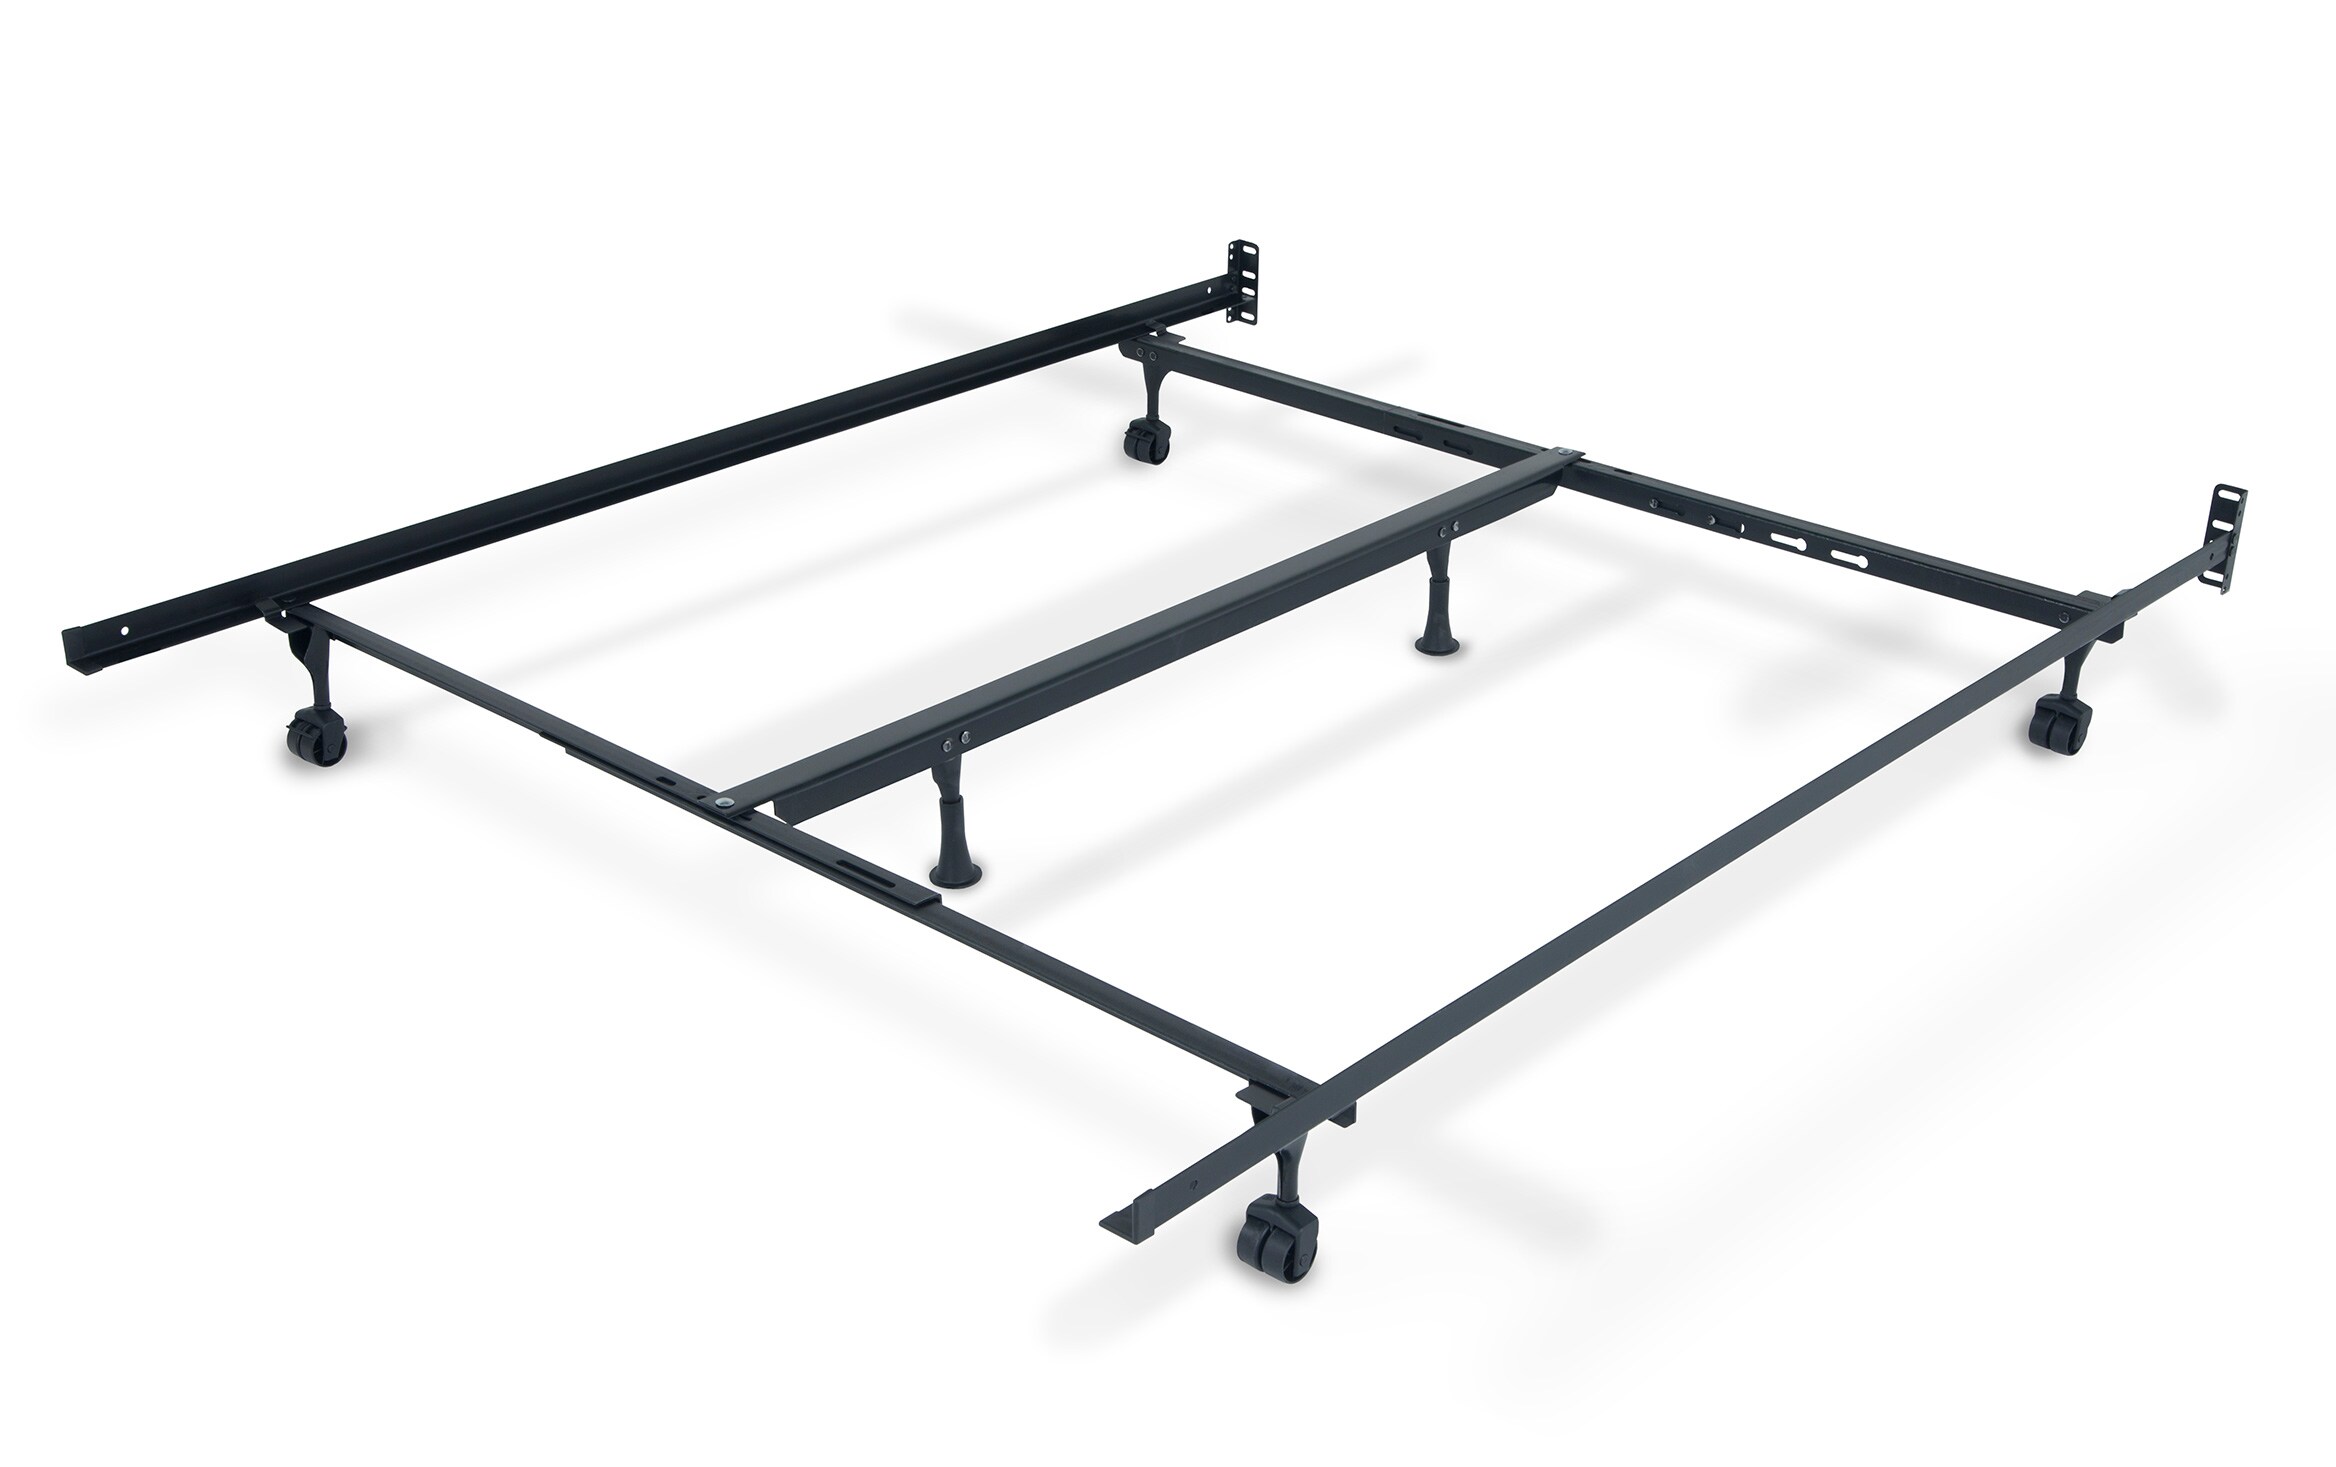 Queen King Bed Frame With Casters Bob, Bobs California King Bed Frame